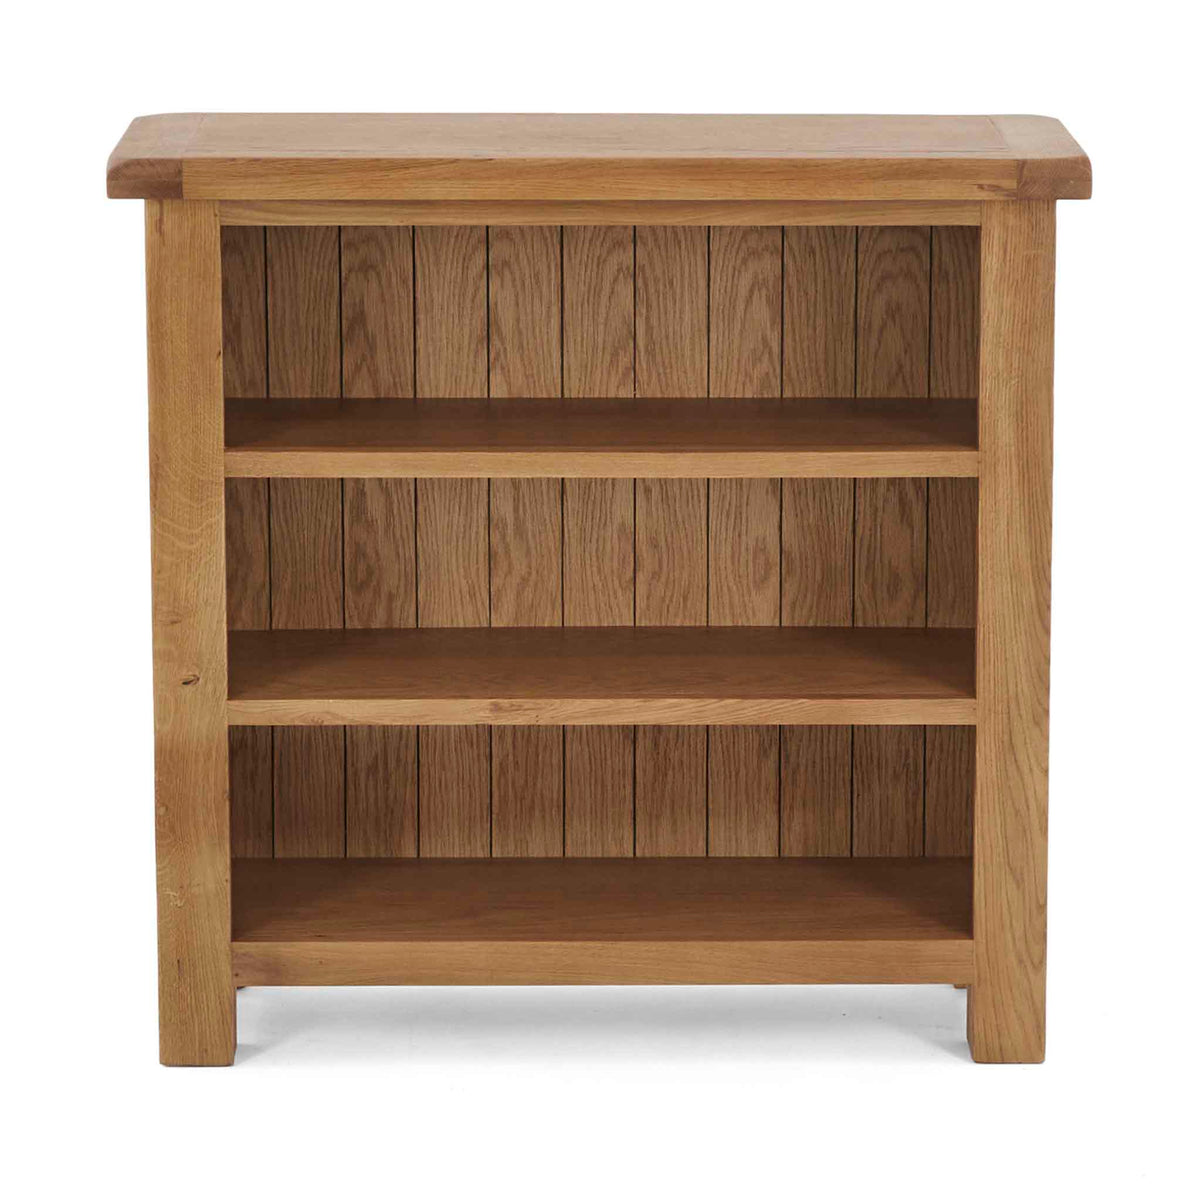 Zelah Oak Small Bookcase - Front view showing top